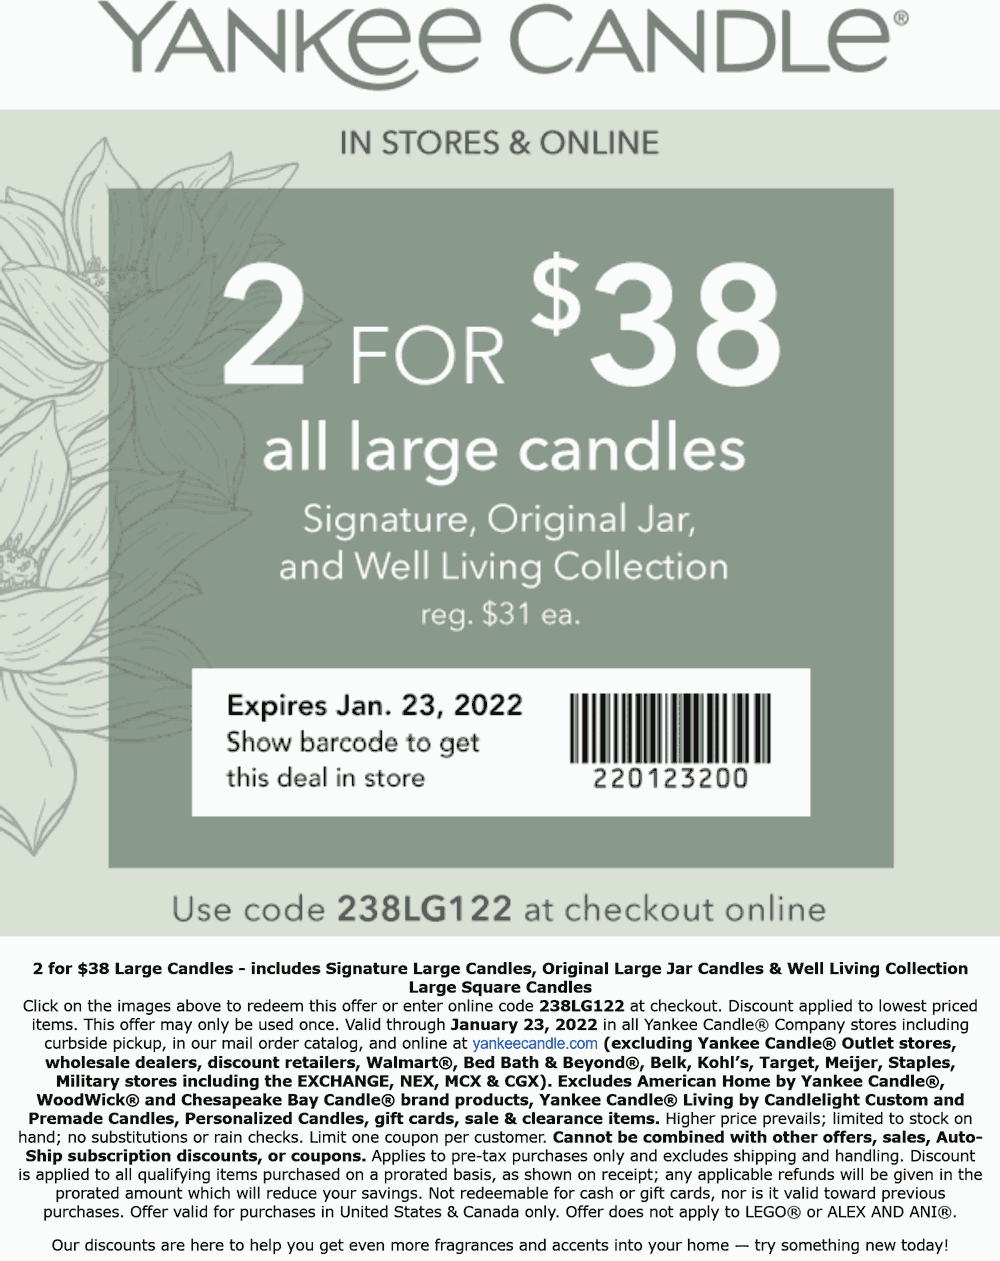 Yankee Candle stores Coupon  Large candles are 2 for $38 at Yankee Candle, or online via promo code 238LG122 #yankeecandle 